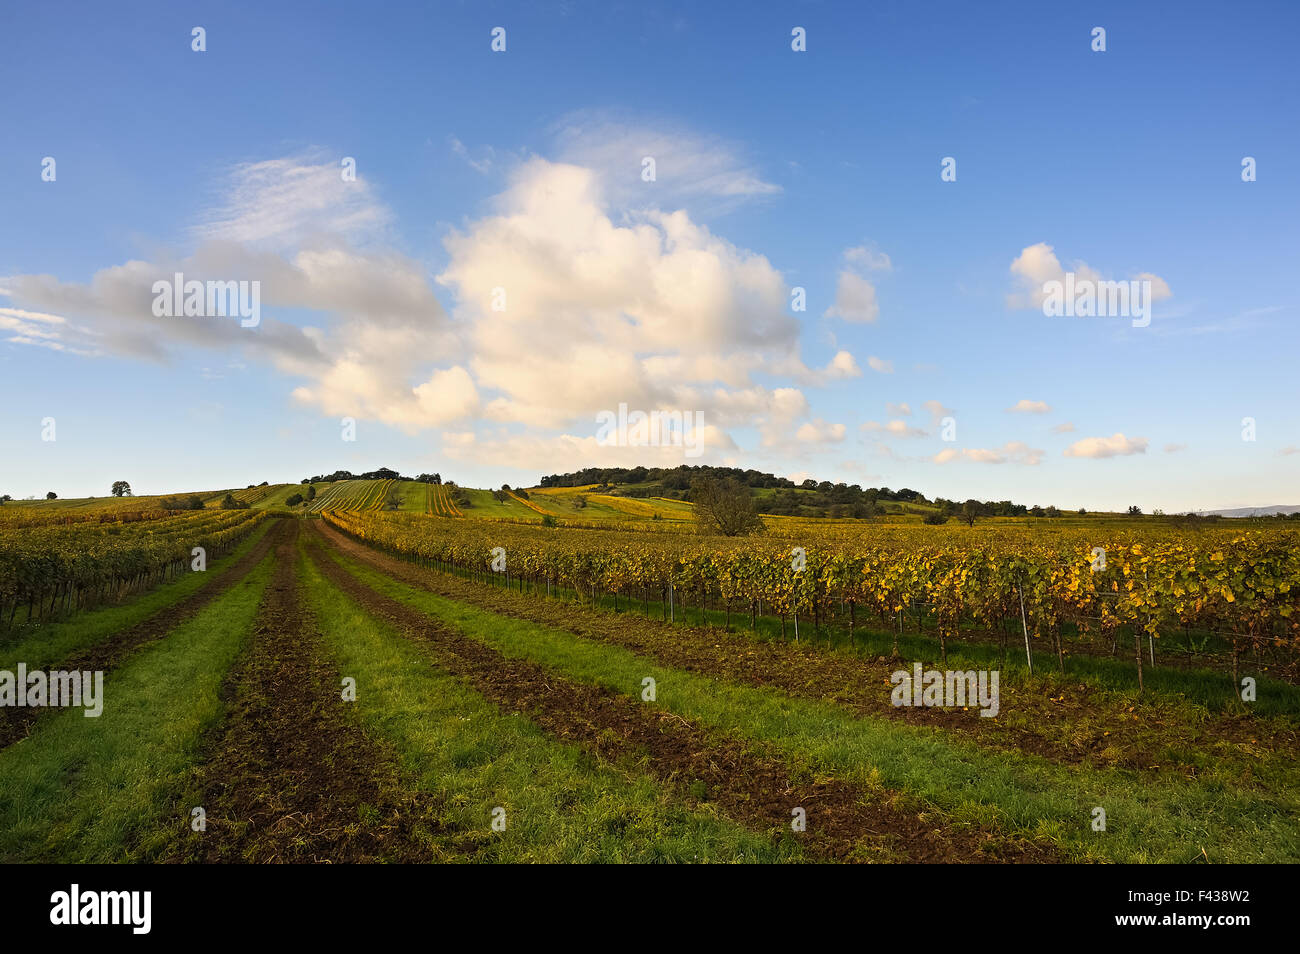 Landscape with vineyards and clouds Stock Photo